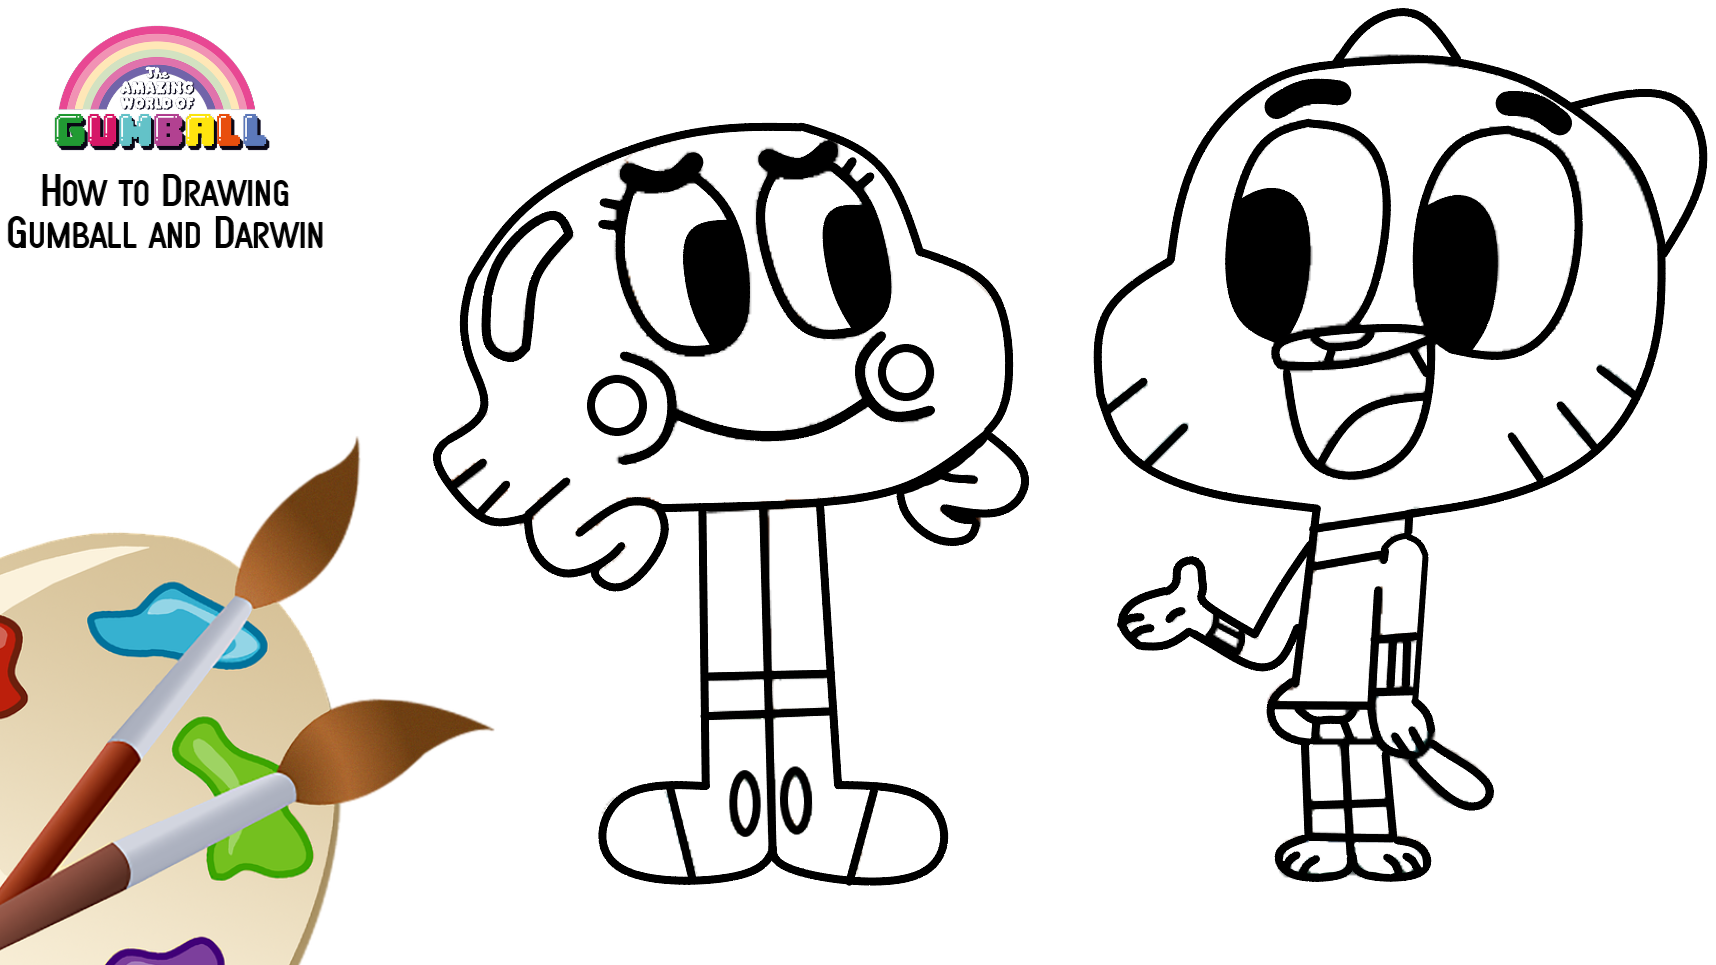 How To Draw Gumball And Darwin Step By Step.